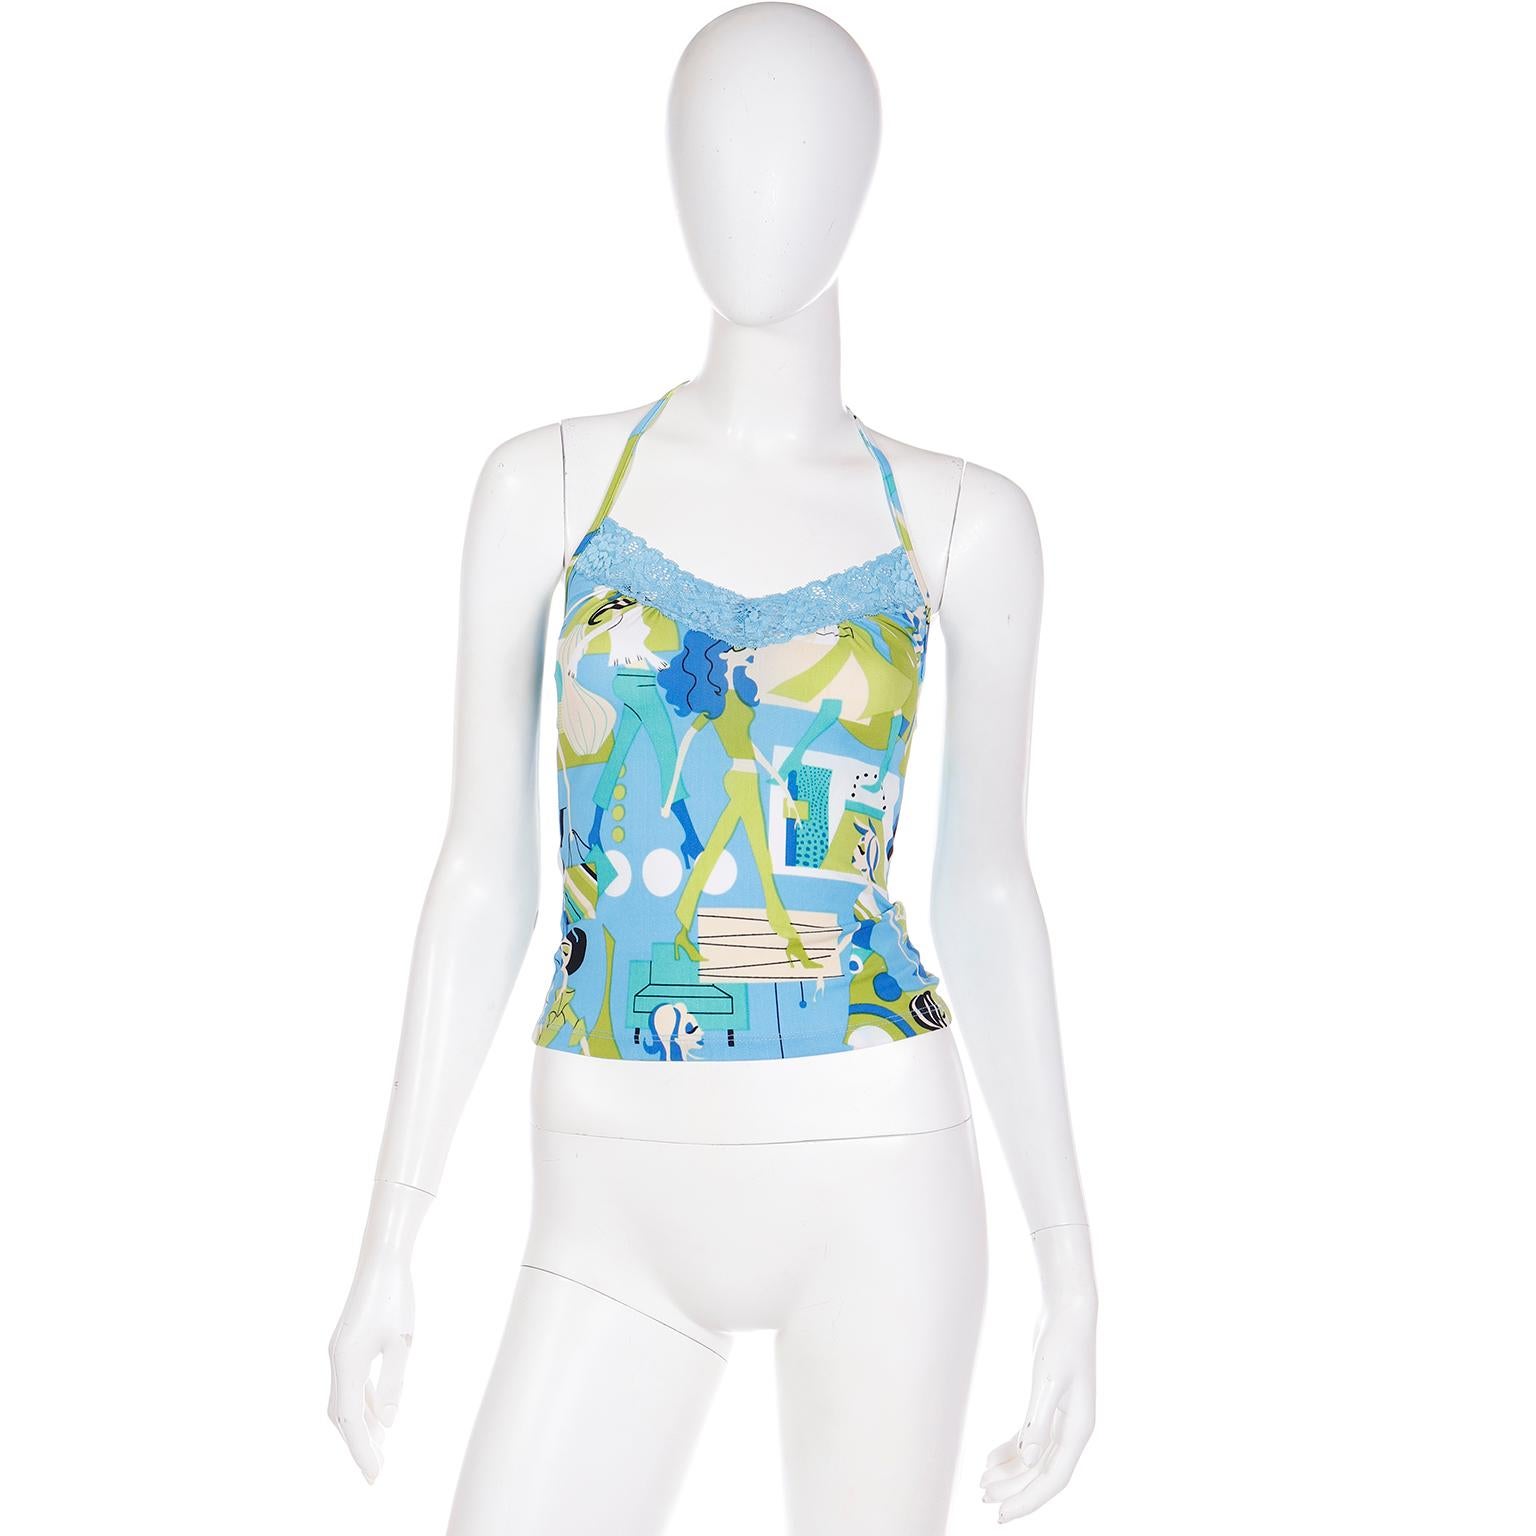 We love this rare vintage 1990's Versace Jeans Couture colorful halter top! What makes this top so special is the novelty print fabric featuring women shopping! The print is in pretty shades of blue and green with blue lace trim. There are straps to